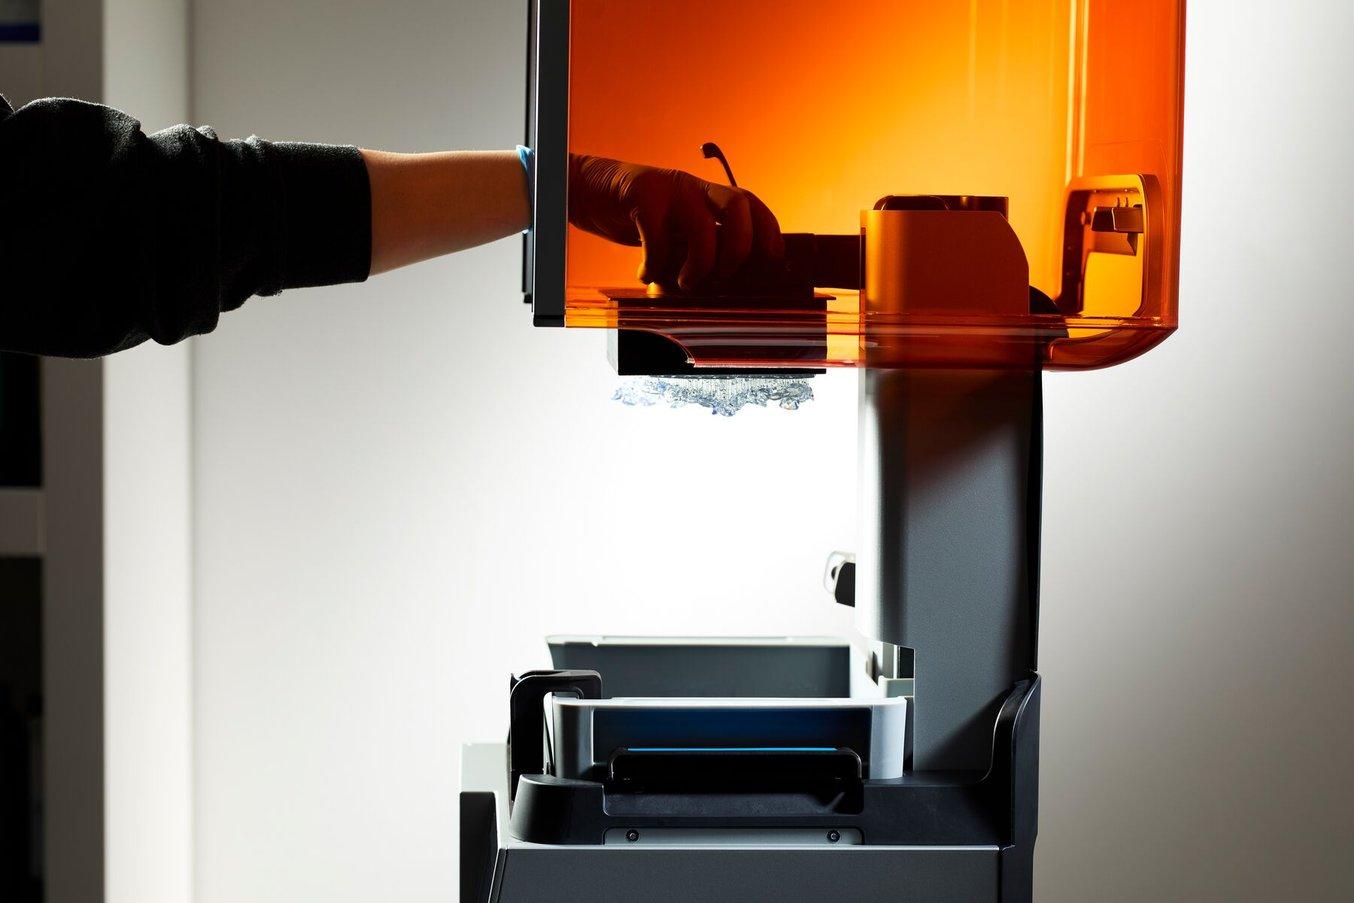 Person reaching inside an open Form 4B printer removing a build platform with prints on it.